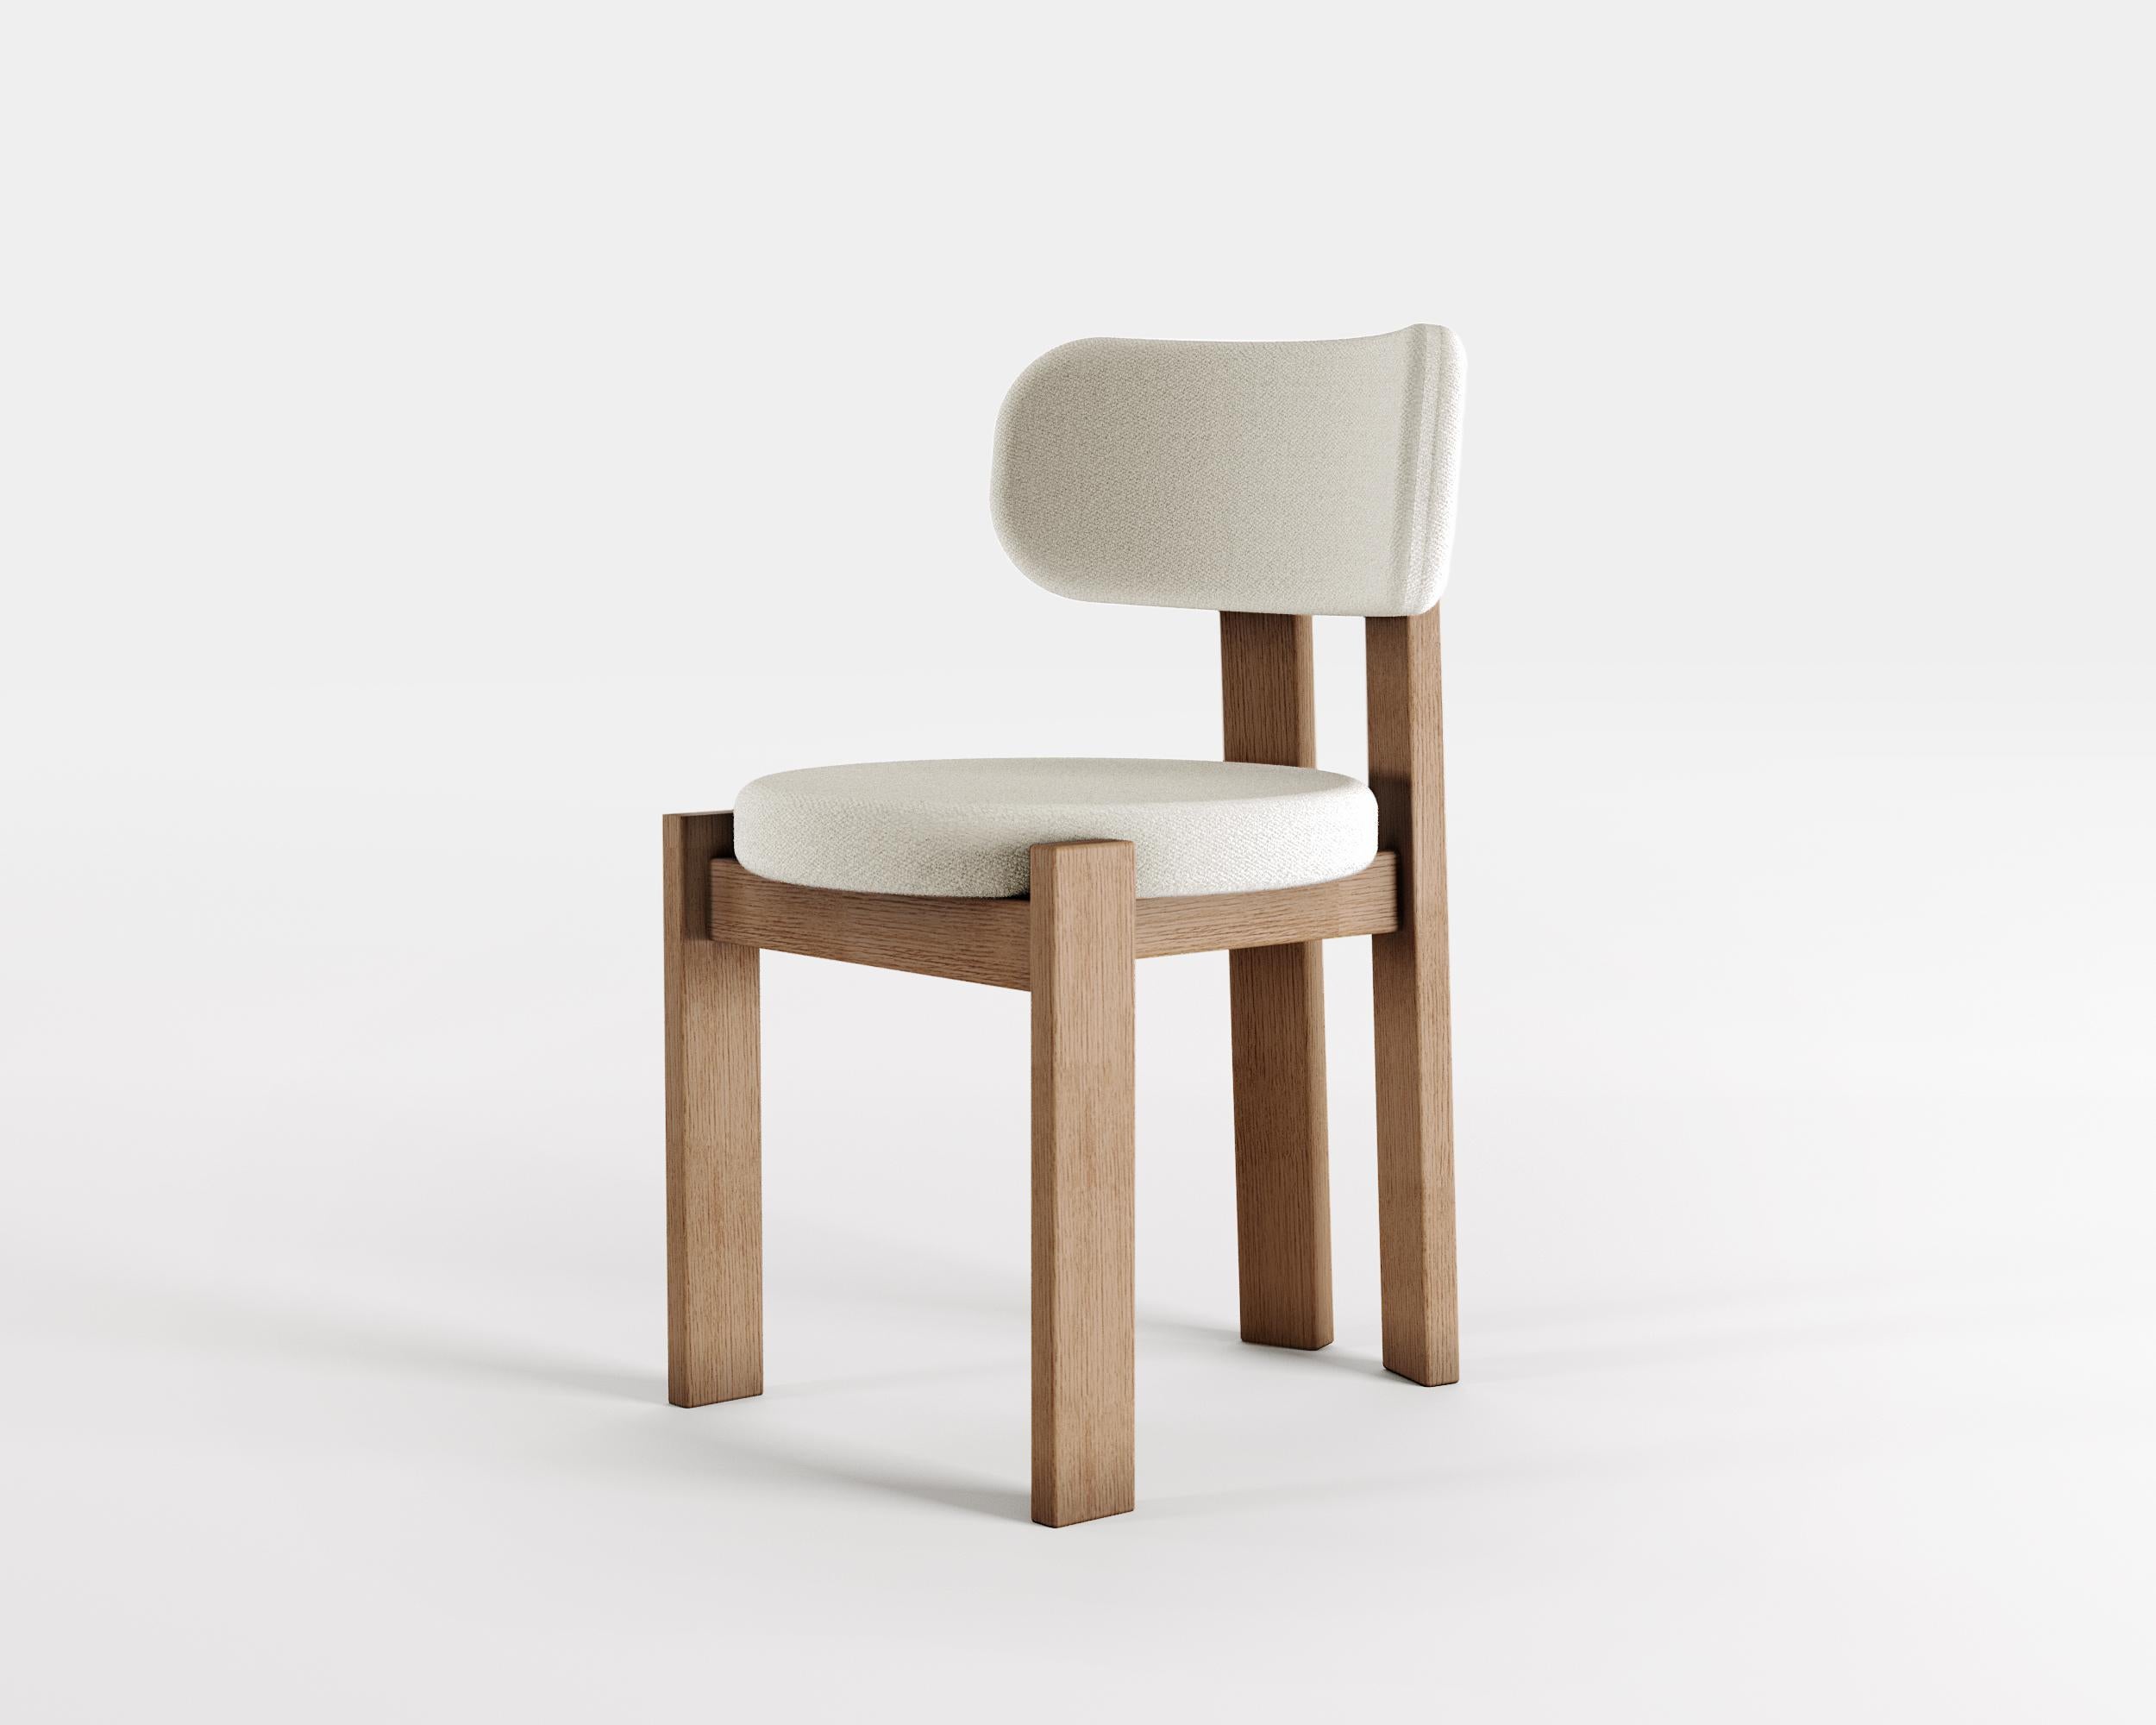 TR Dining Chair by Fora Projects 
Designed by Theresa Rand

Material: Solid oak

Model shown: medium oak / fabric: Kvadrat, Vidar 4 col.1511
Different fabrics available

Dimensions:

H. 78 x L. 54 x W. 49 cm / Seat 45 cm

_______________

The TR